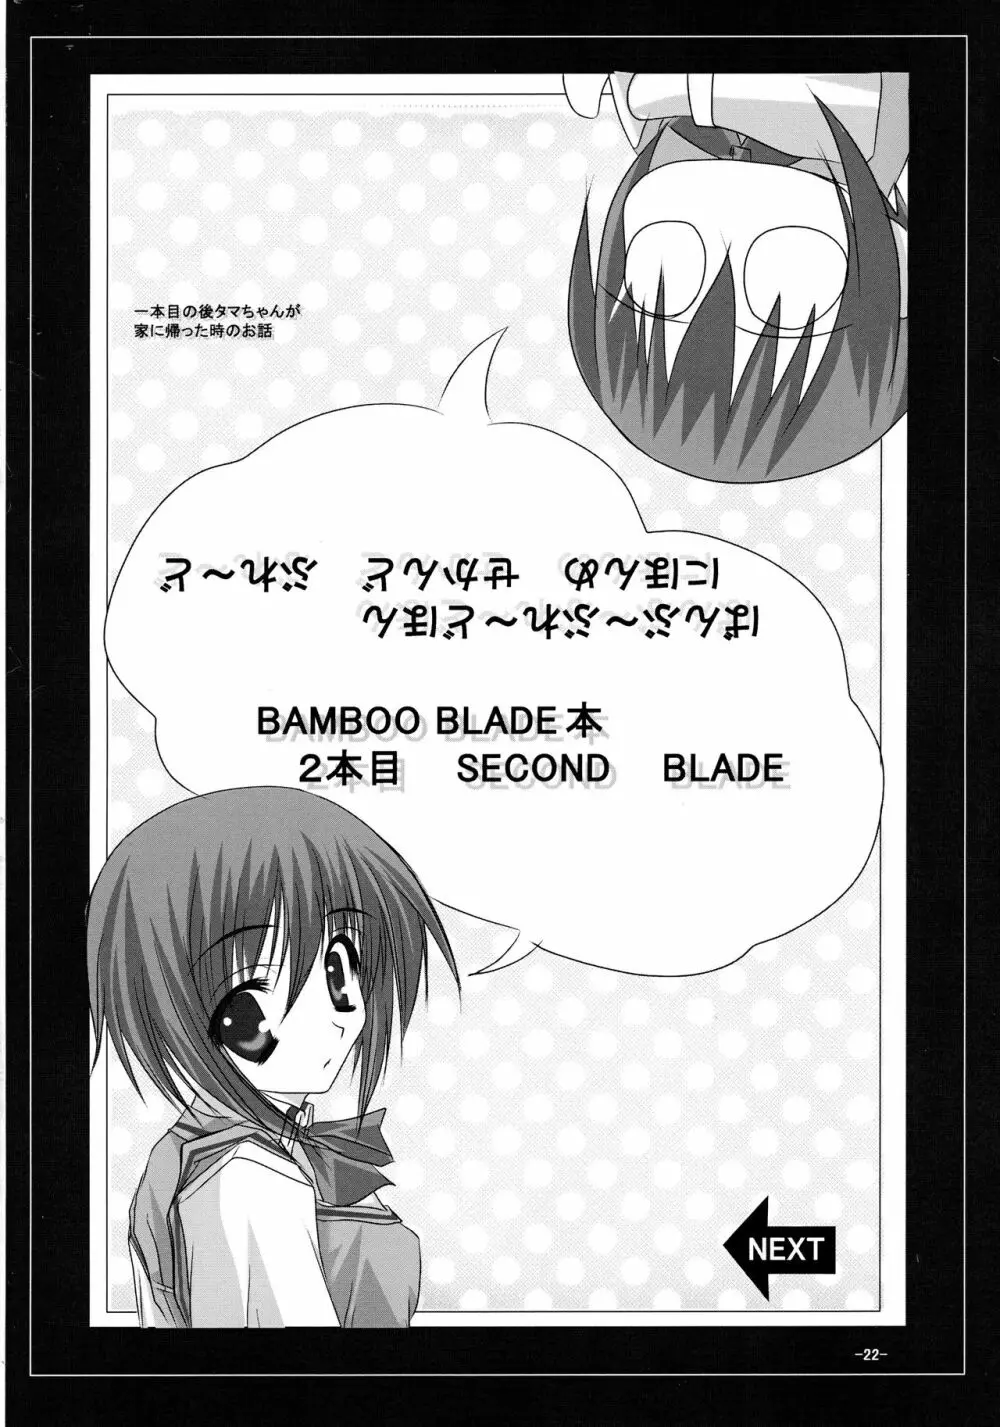 BLADE OF SECOND Page.22